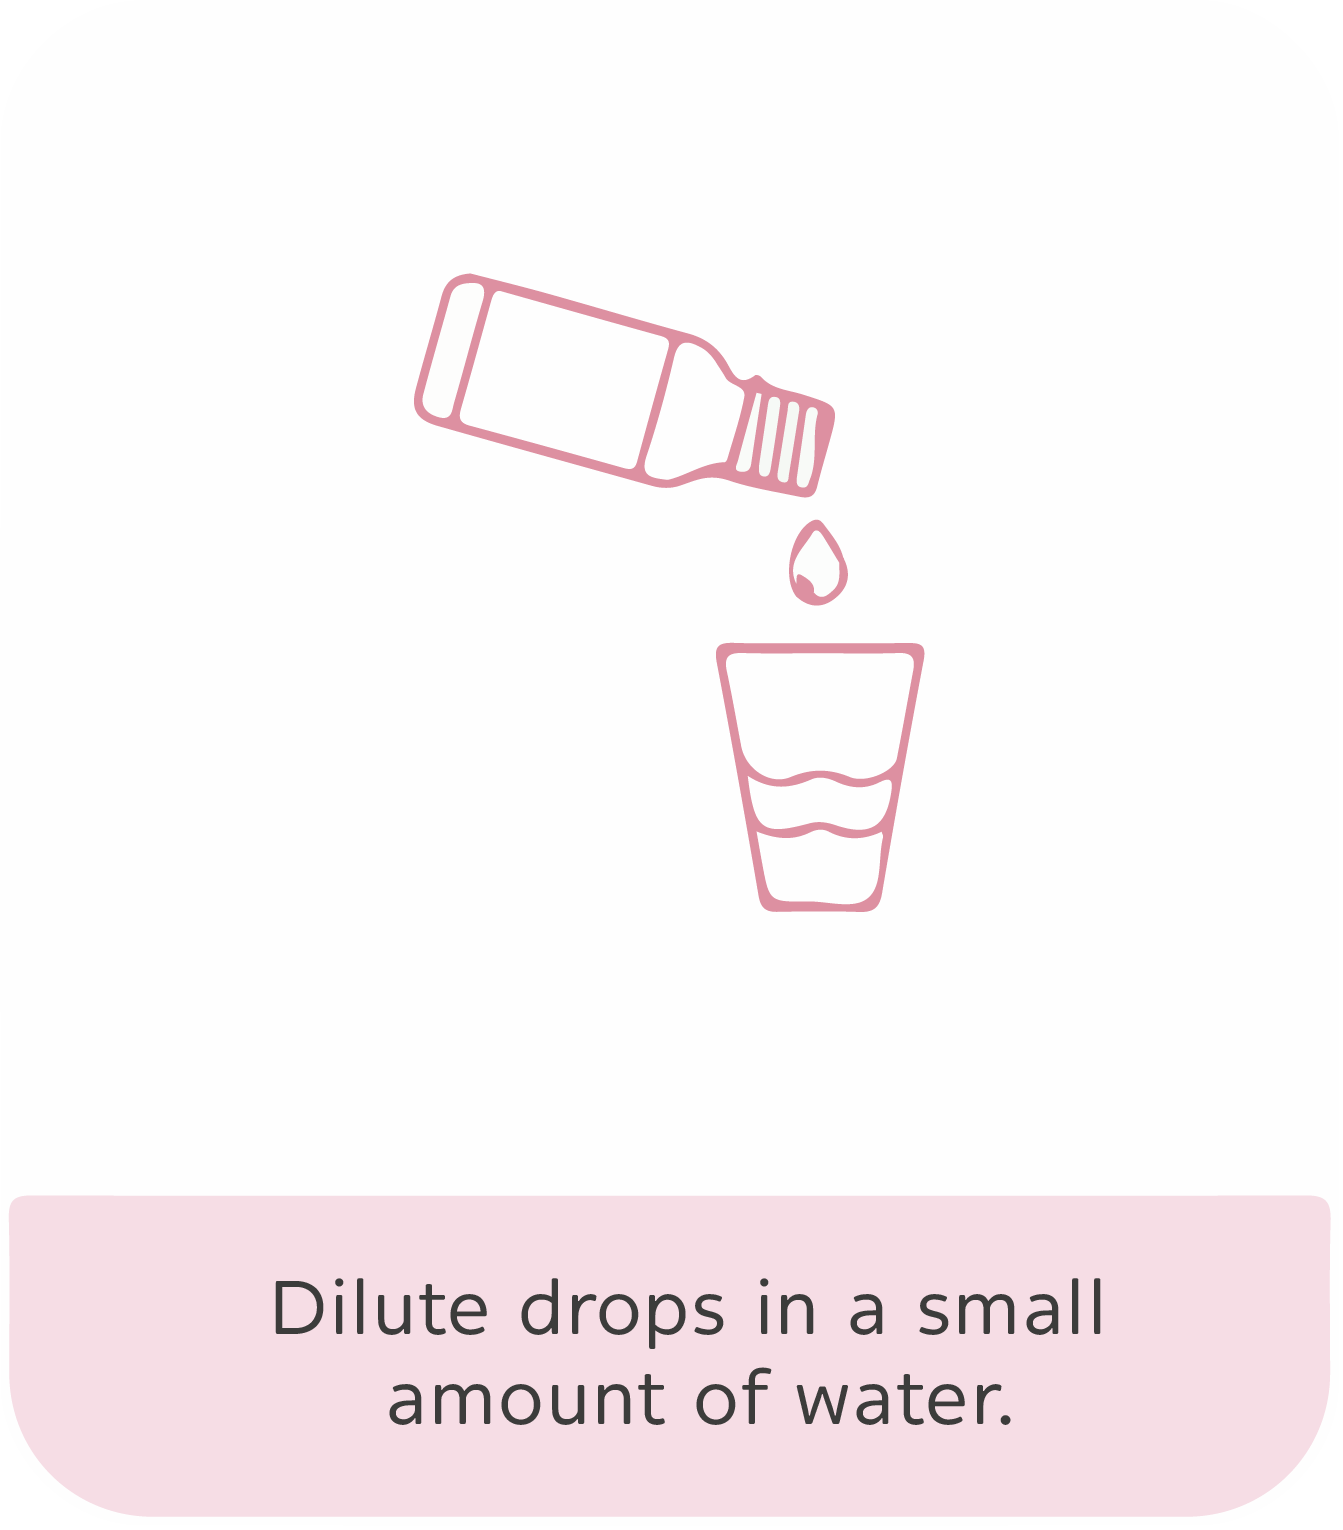 How to use product - Second step: Dilute drops in a small amount of water